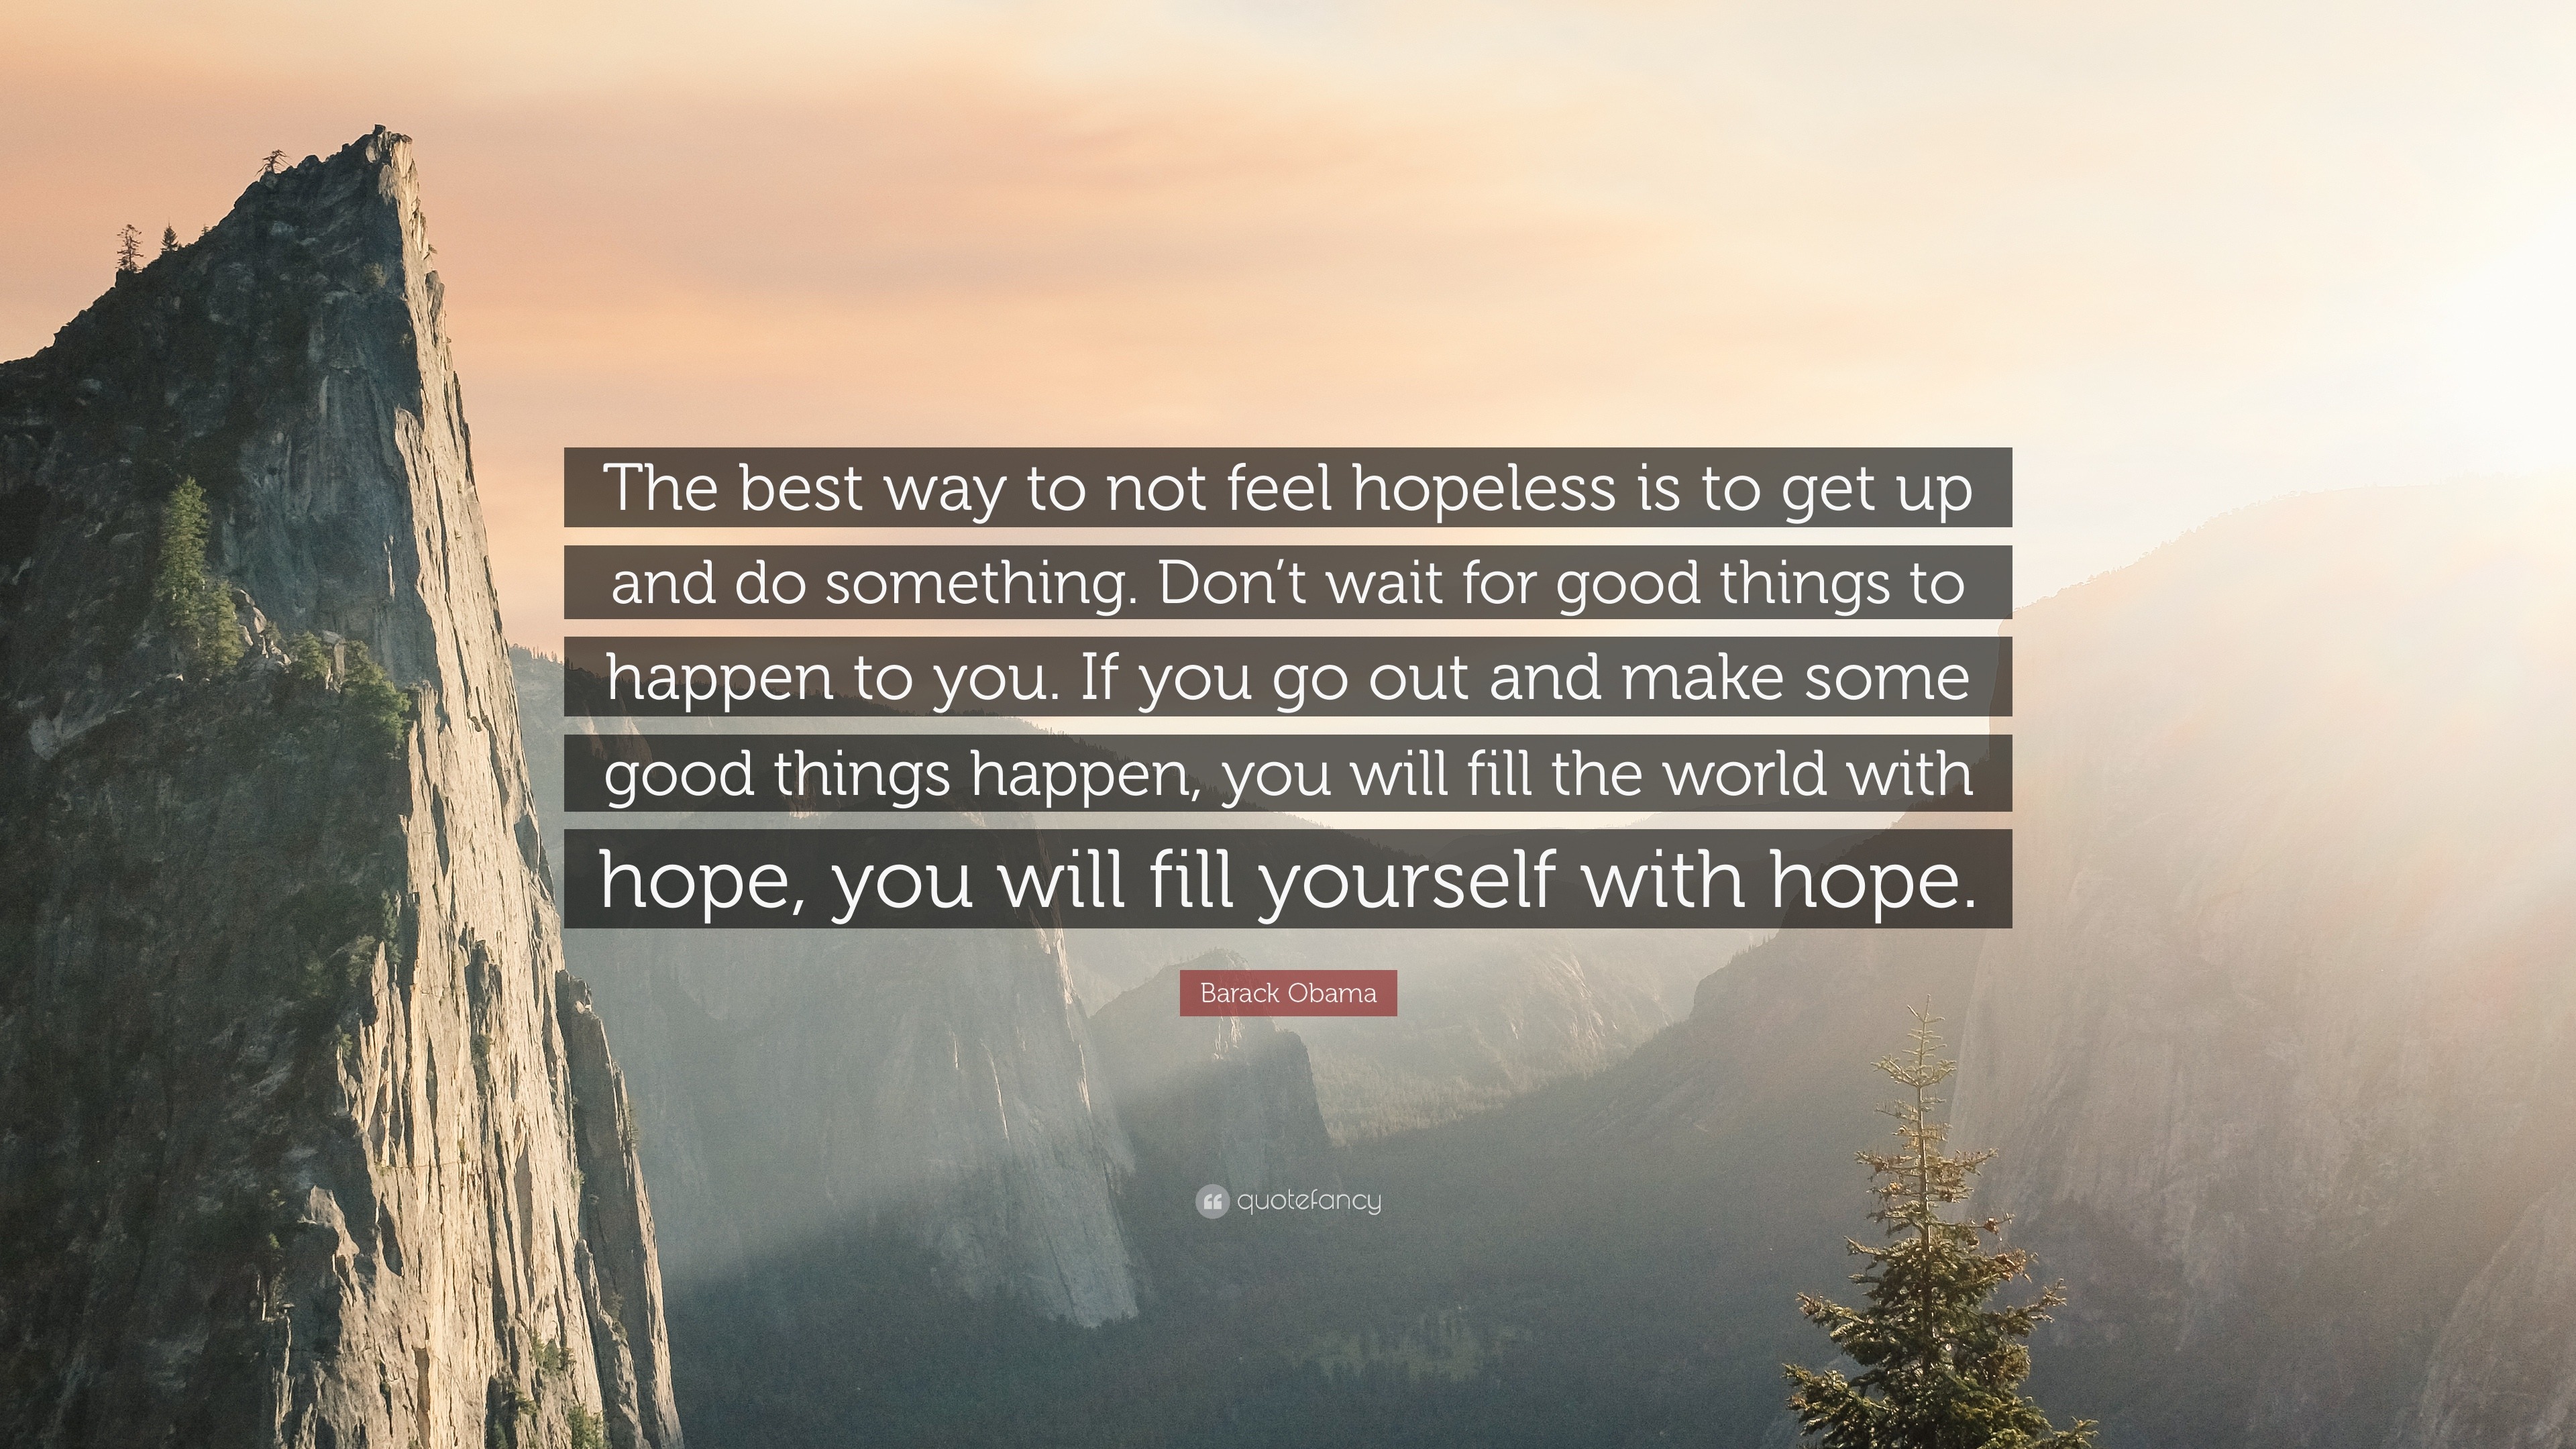 Barack Obama Quote: “The best way to not feel hopeless is to get up and